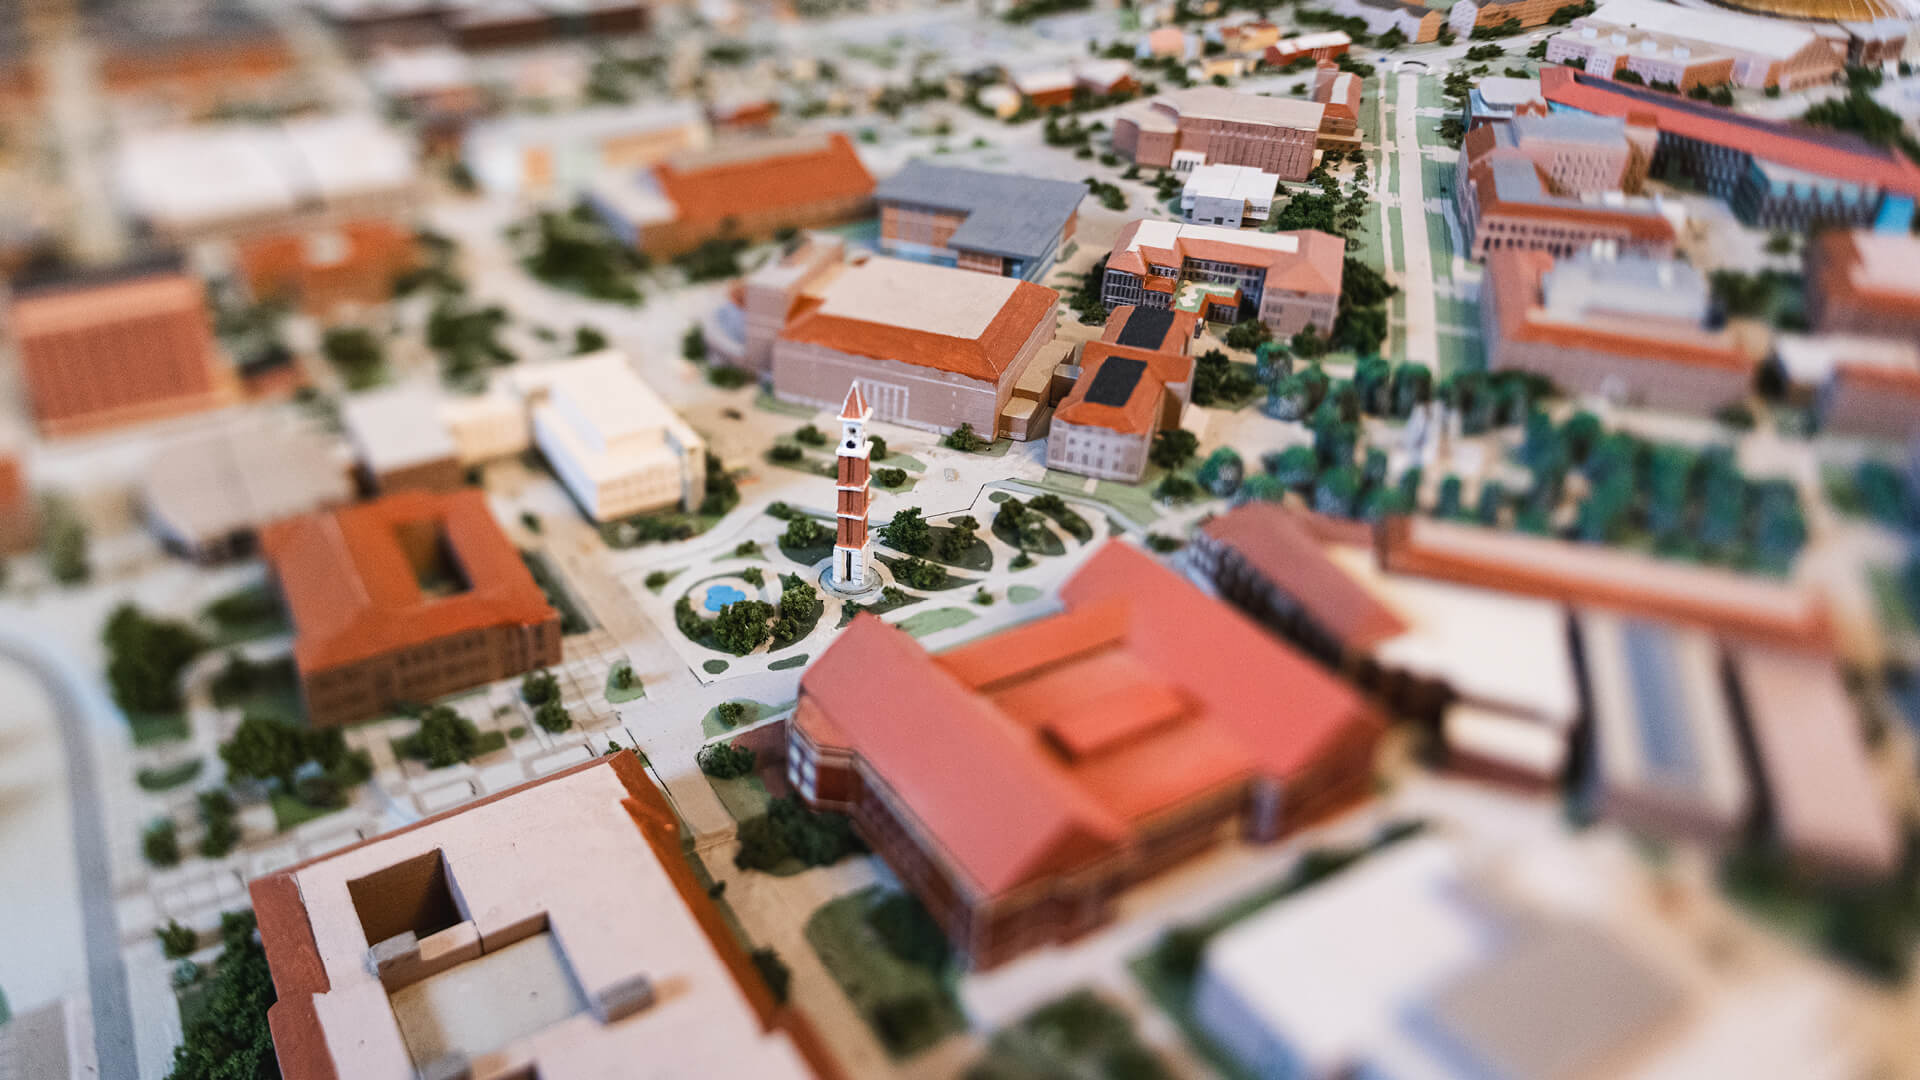 A miniature replica of the university's over 2,600-acre campus.